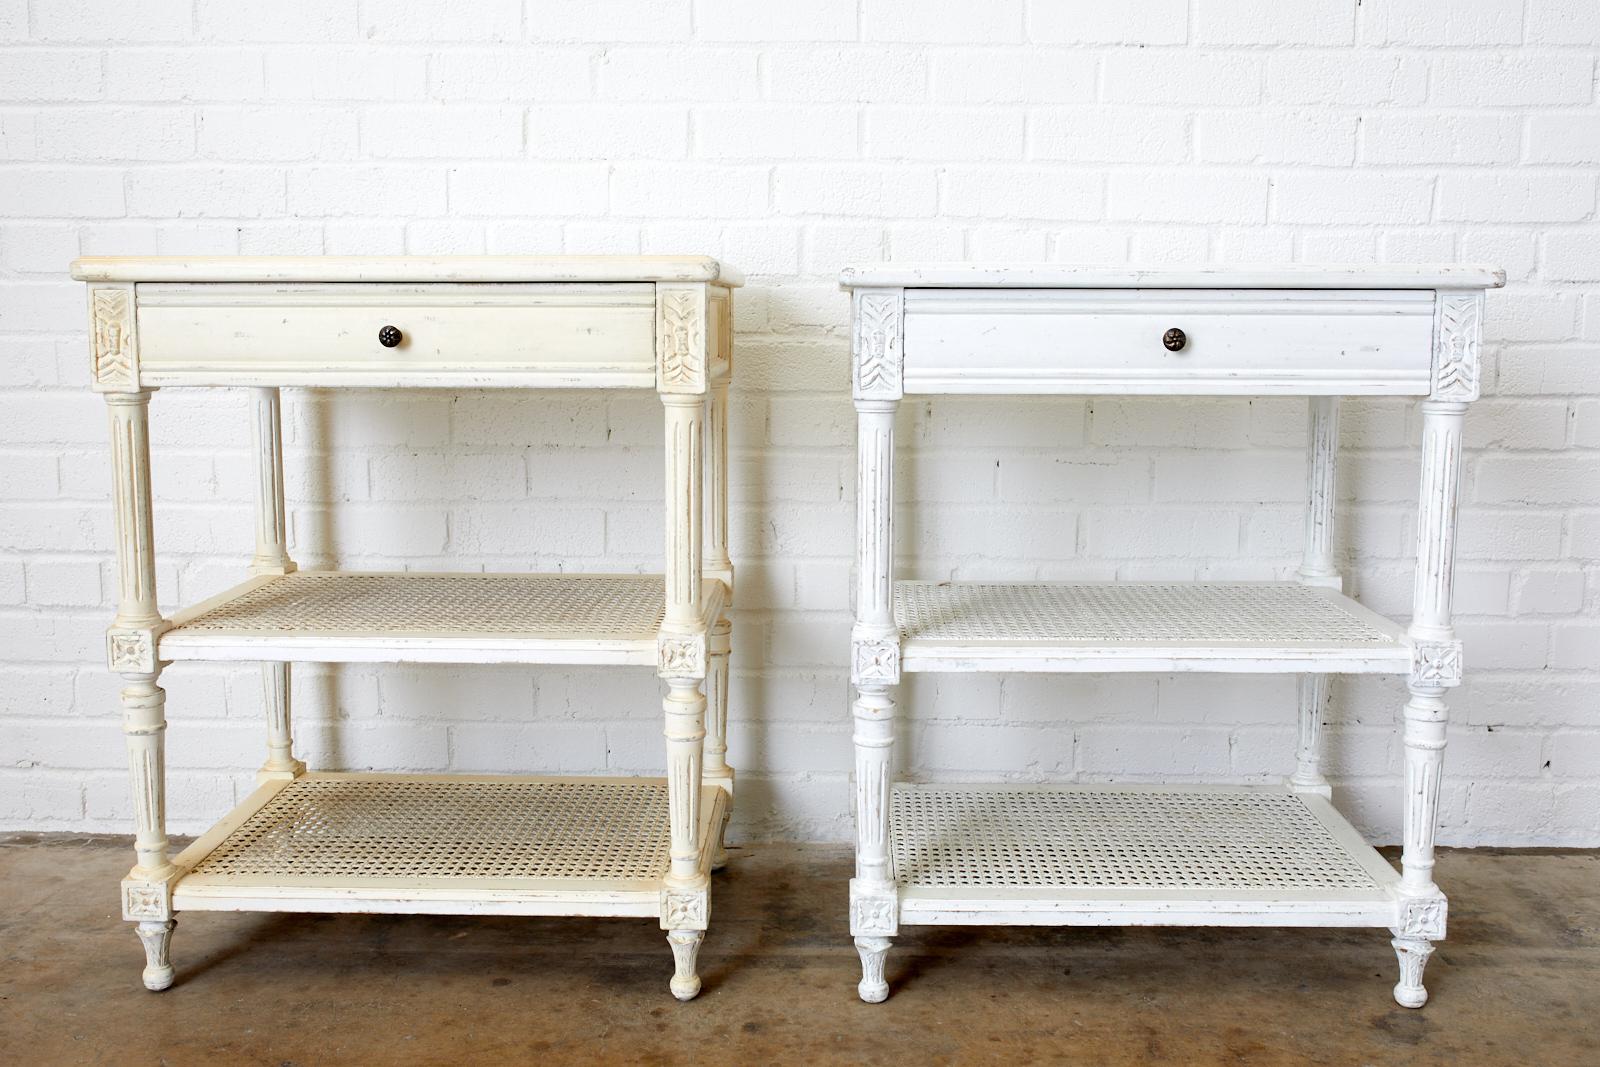 French Louis XVI style or Swedish Gustavian taste pair of painted three-tier nightstands. Featuring a white insert marble top and caned shelf design by Rachel Ashwell. Known for her country French and beach cottage style these pieces are from her